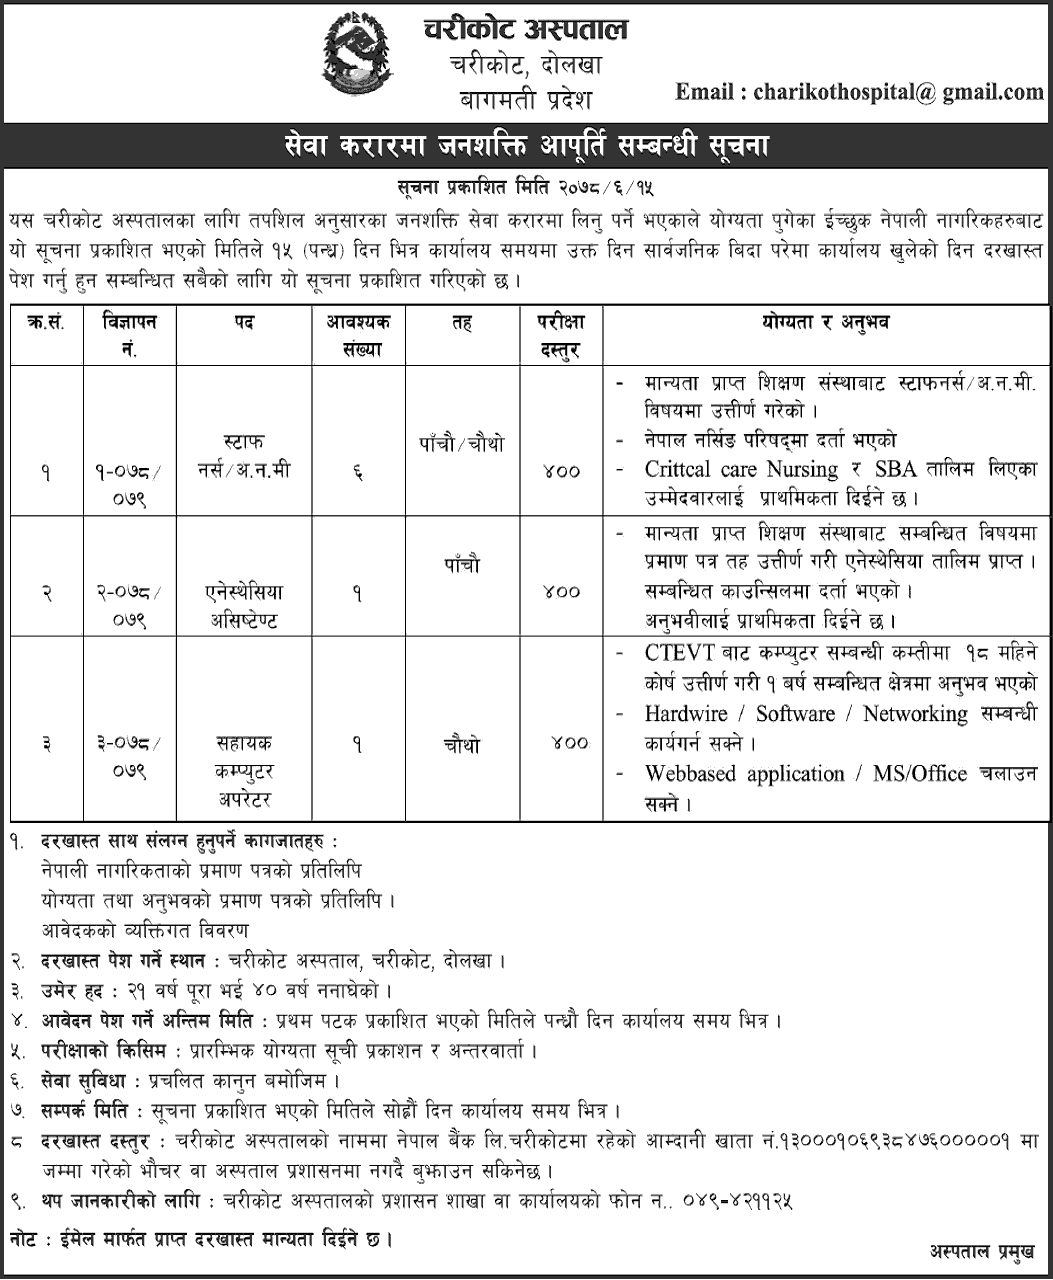 Charikot Hospital Vacancy for Staff Nurse, ANM, Anesthesia Assistant and Assistant Computer Operator